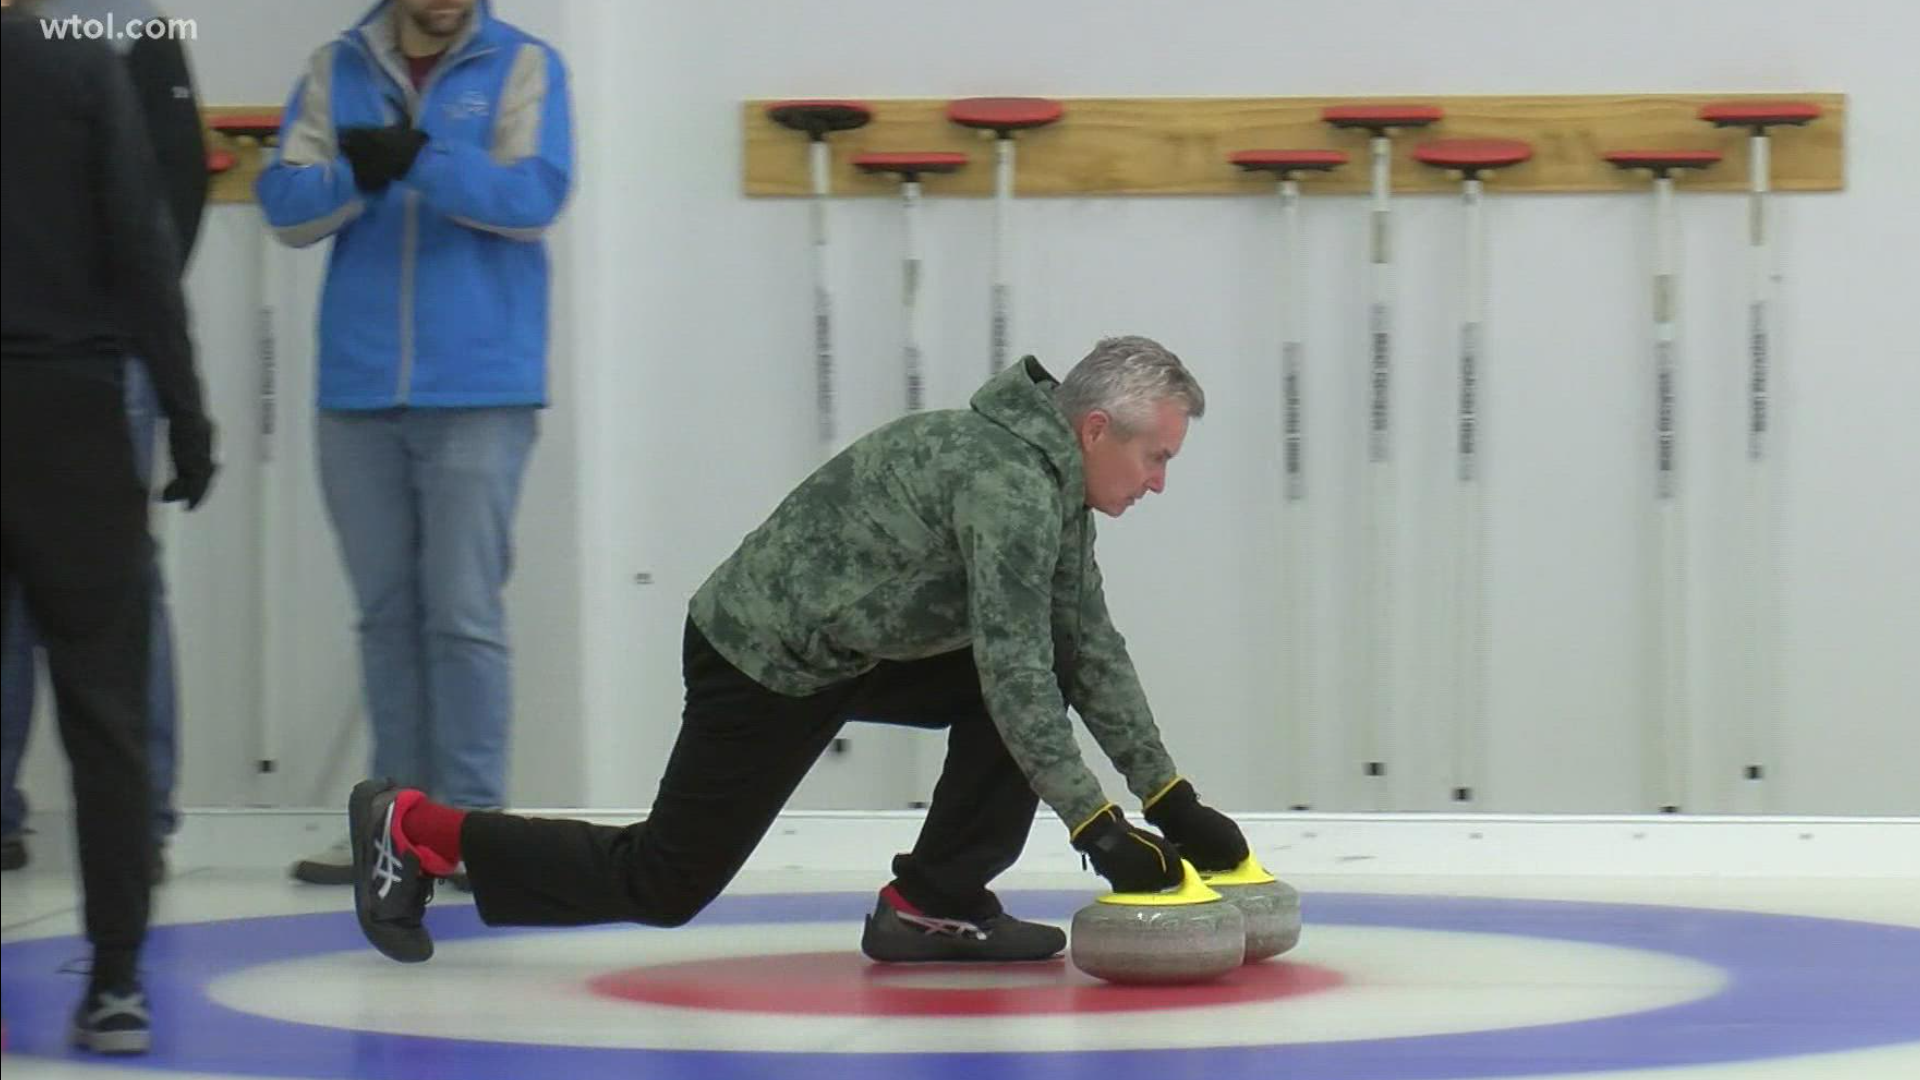 Bowling Green Curling Club offers lessons to hundreds during the winter games.